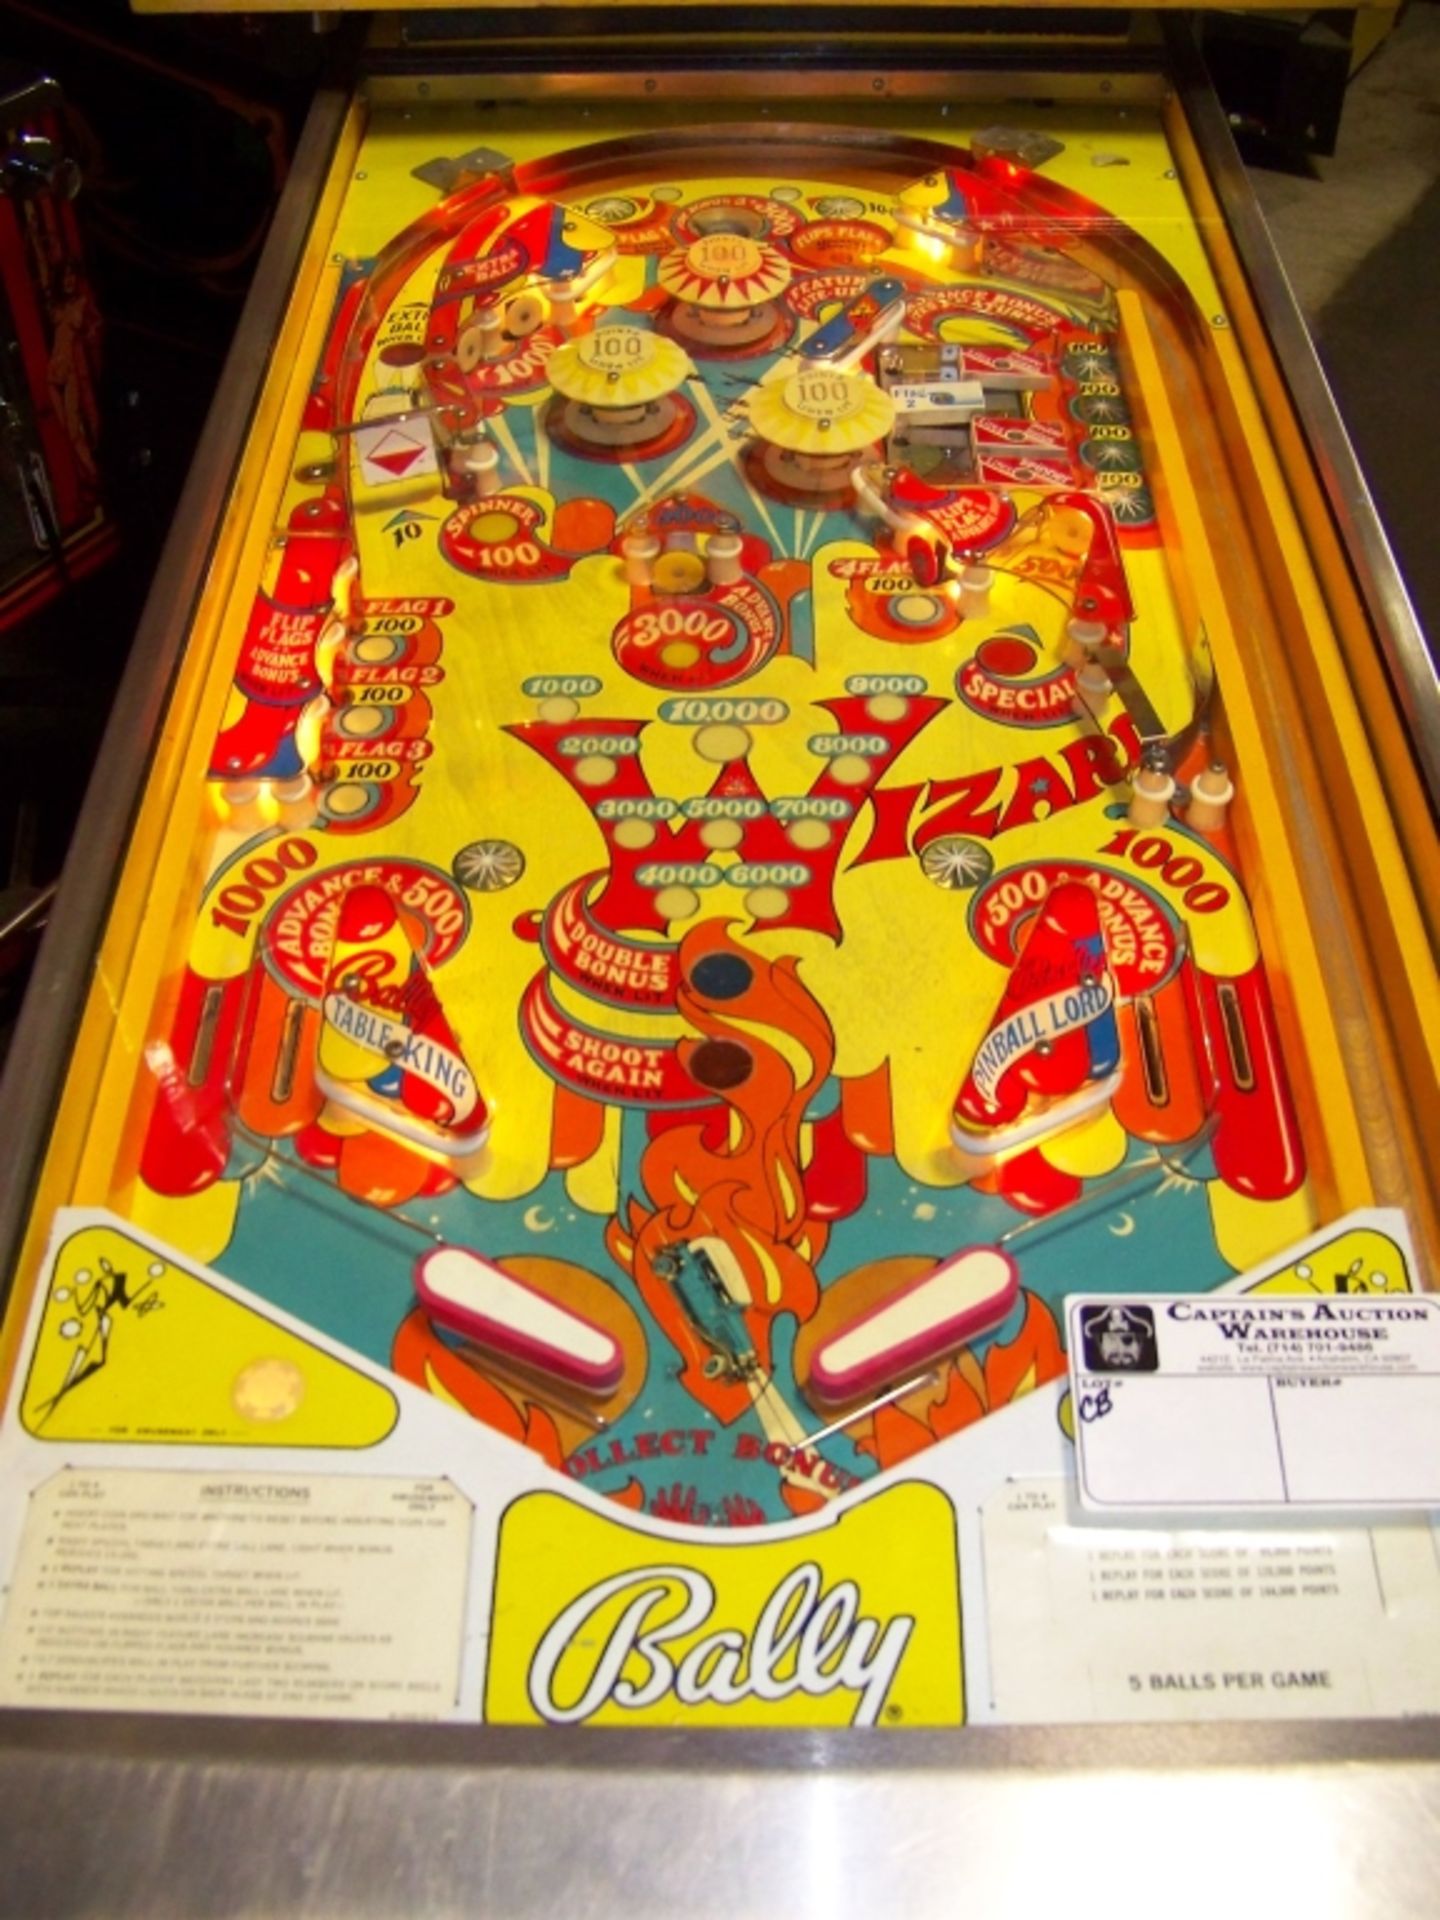 WIZARD! PINBALL MACHINE BALLY E.M. 1975 Item is in used condition. Evidence of wear and commercial - Image 9 of 10